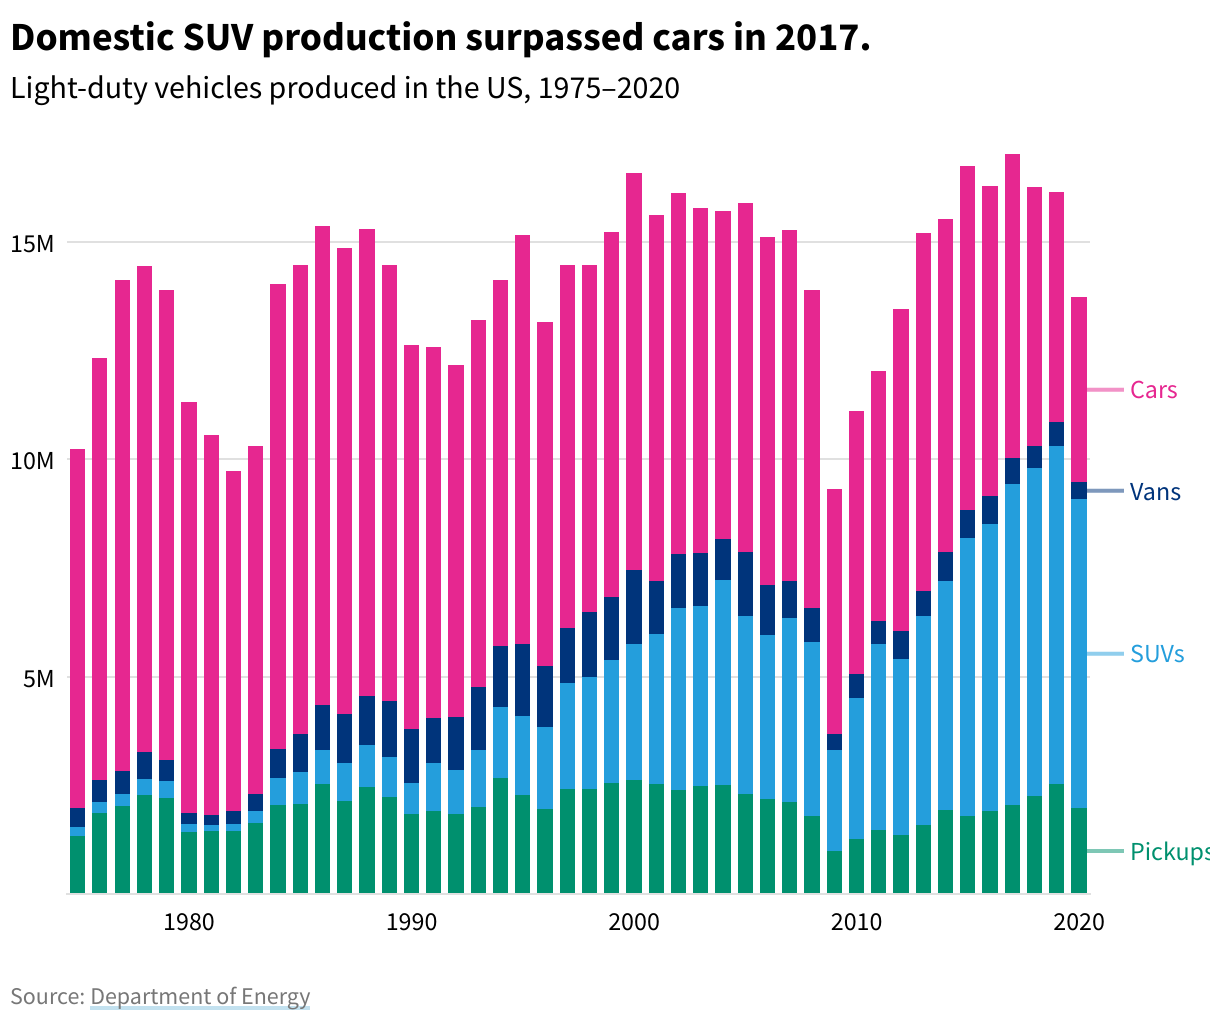 Stacked bar chart showing US auto production from 1975 to 2020, broken down by cars, vans, SUVs, and pickups. 